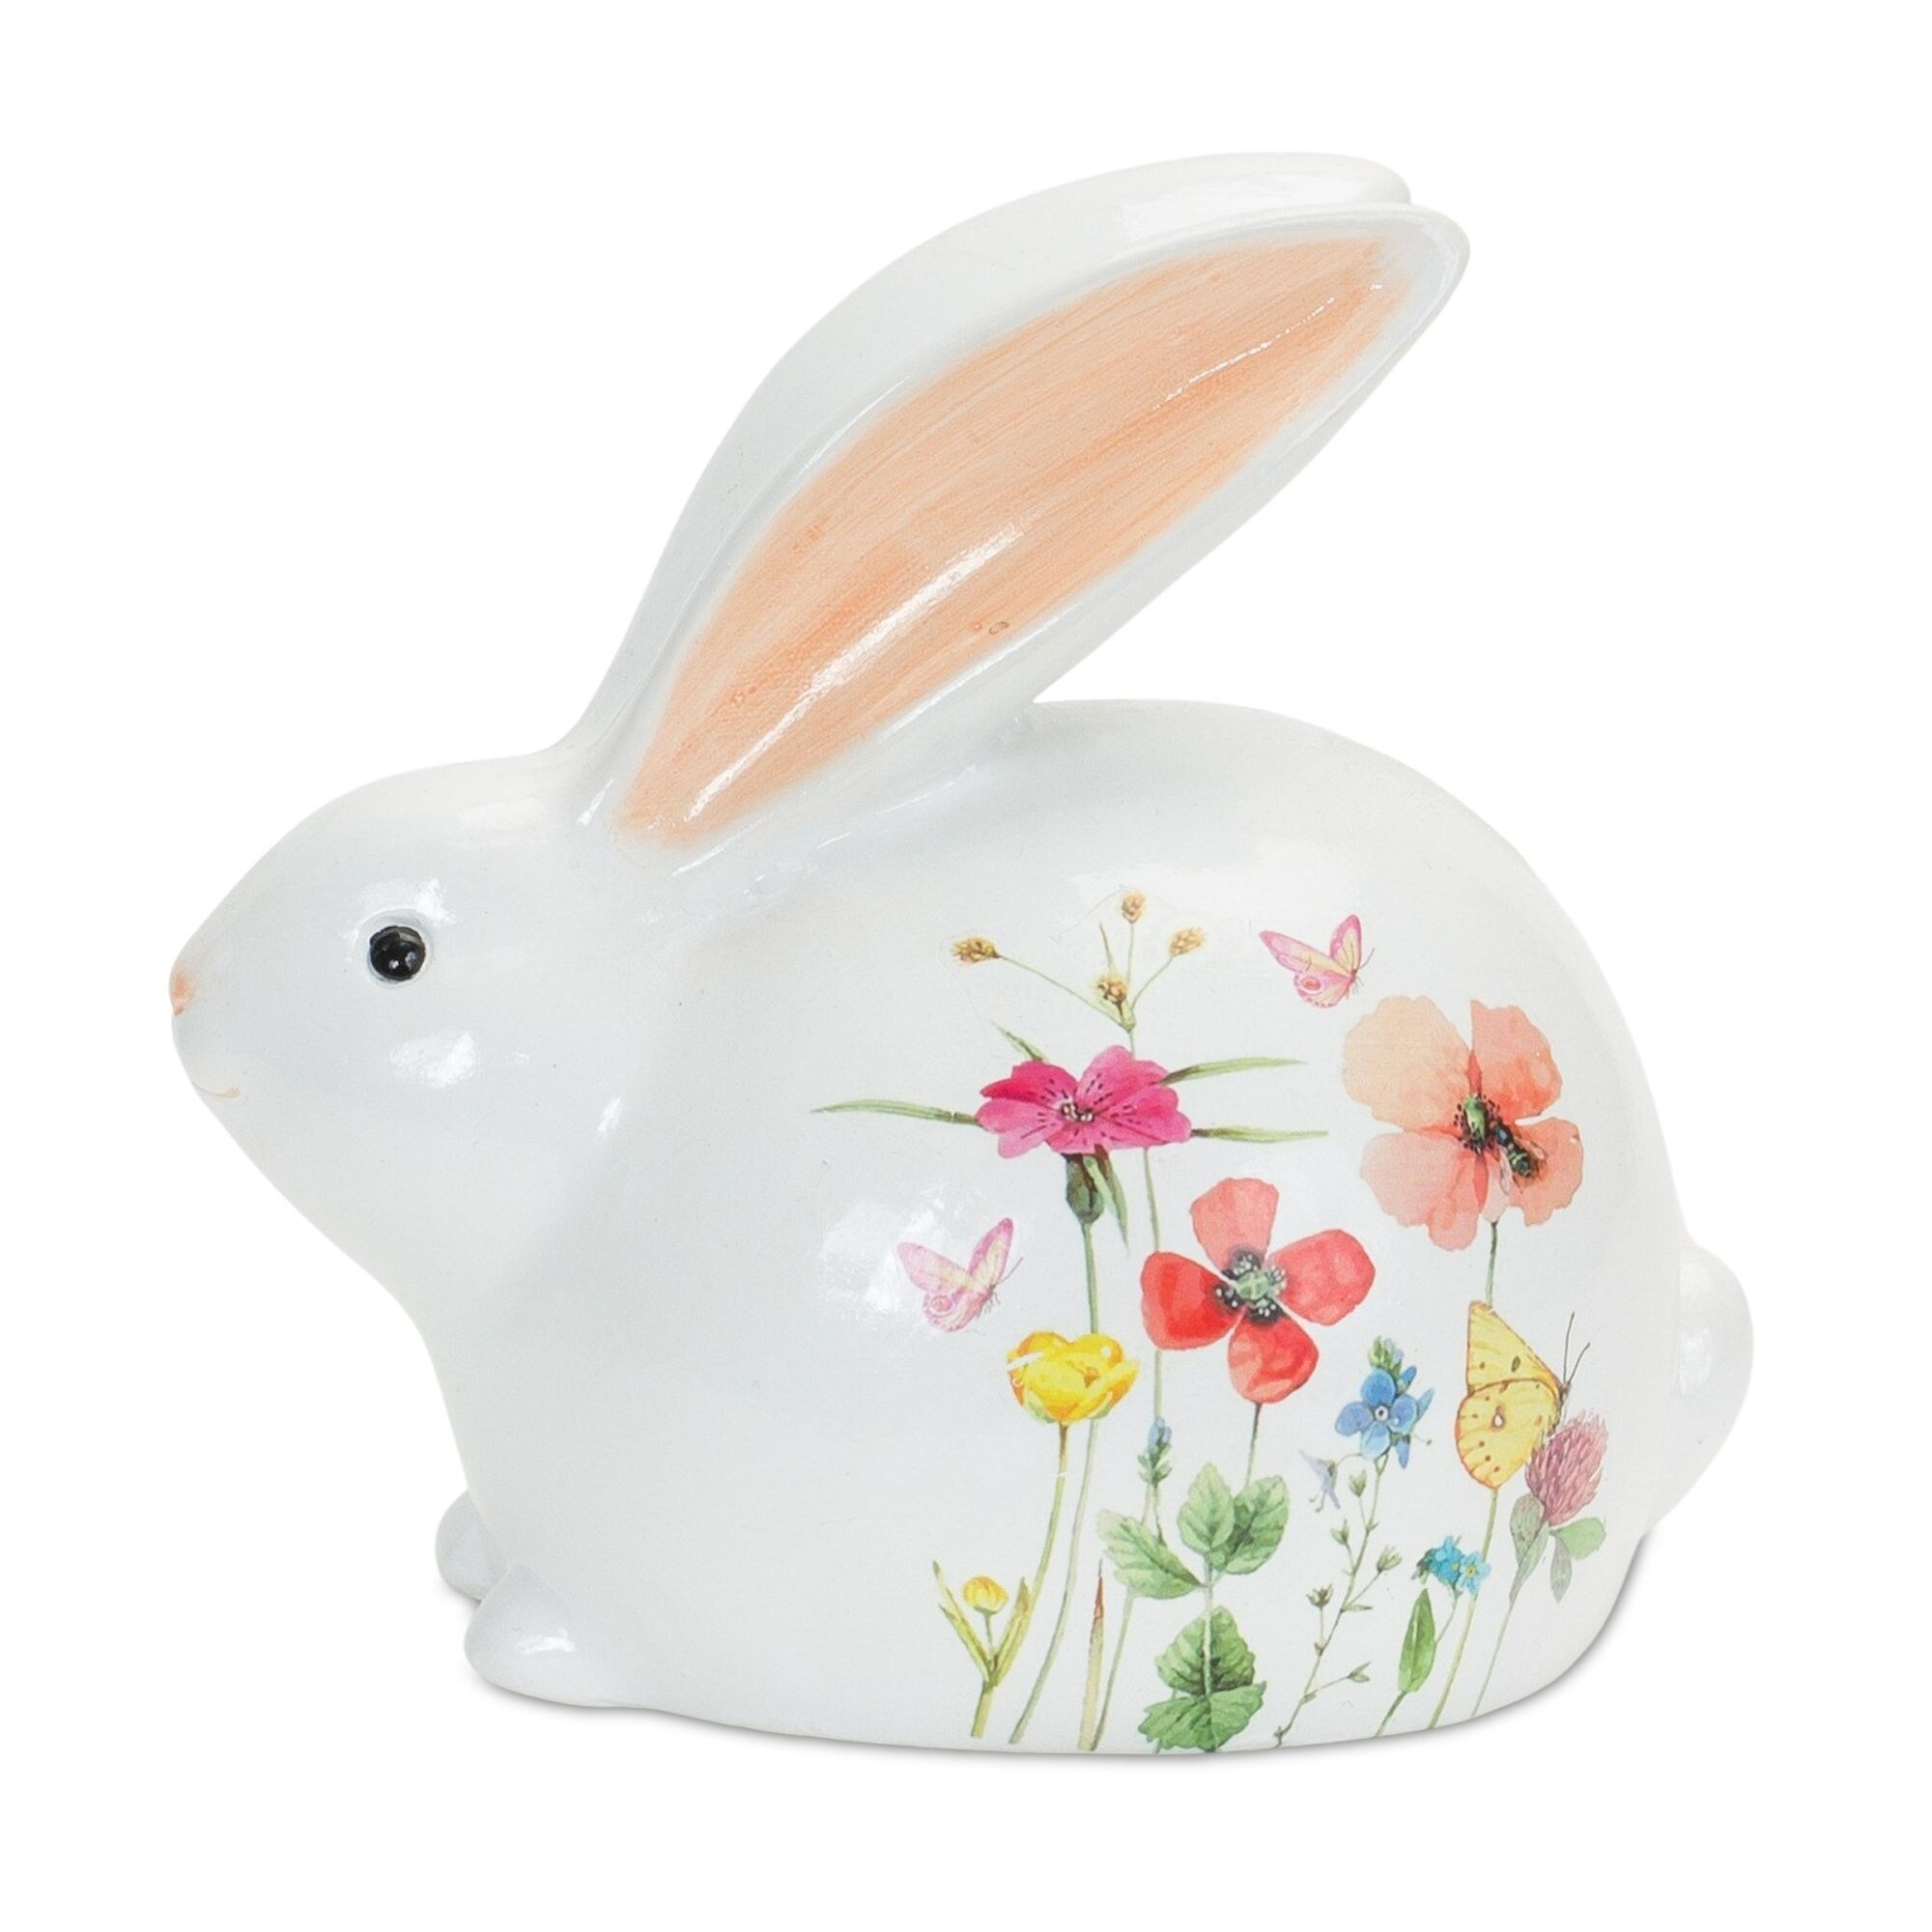 Set of 4 Floral Bunny Tabletop Figurines 6.5"